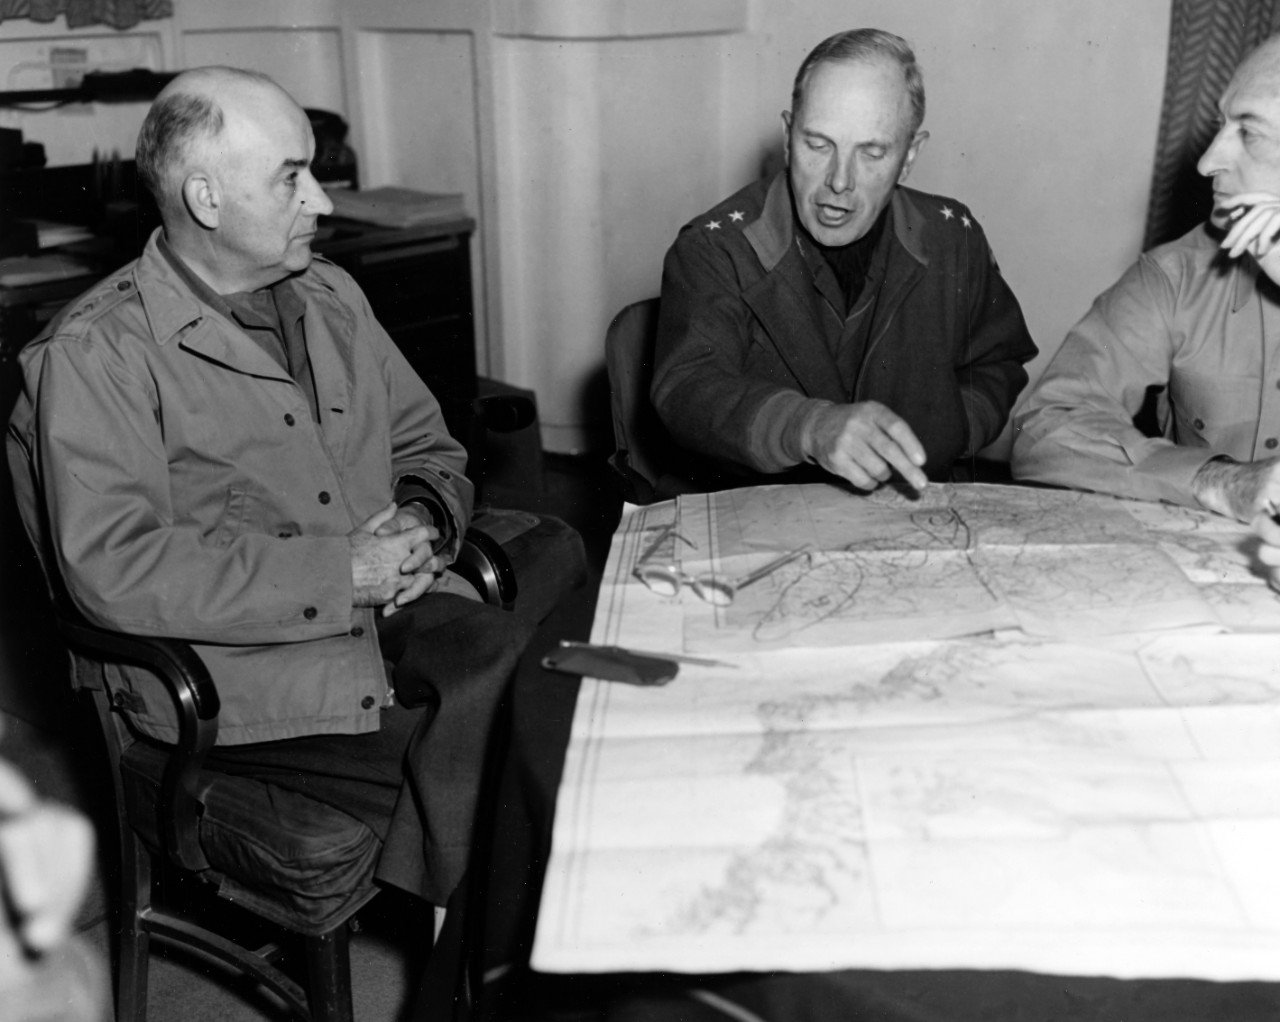 3 unformed men sit around a table, one pointing at map in front of them